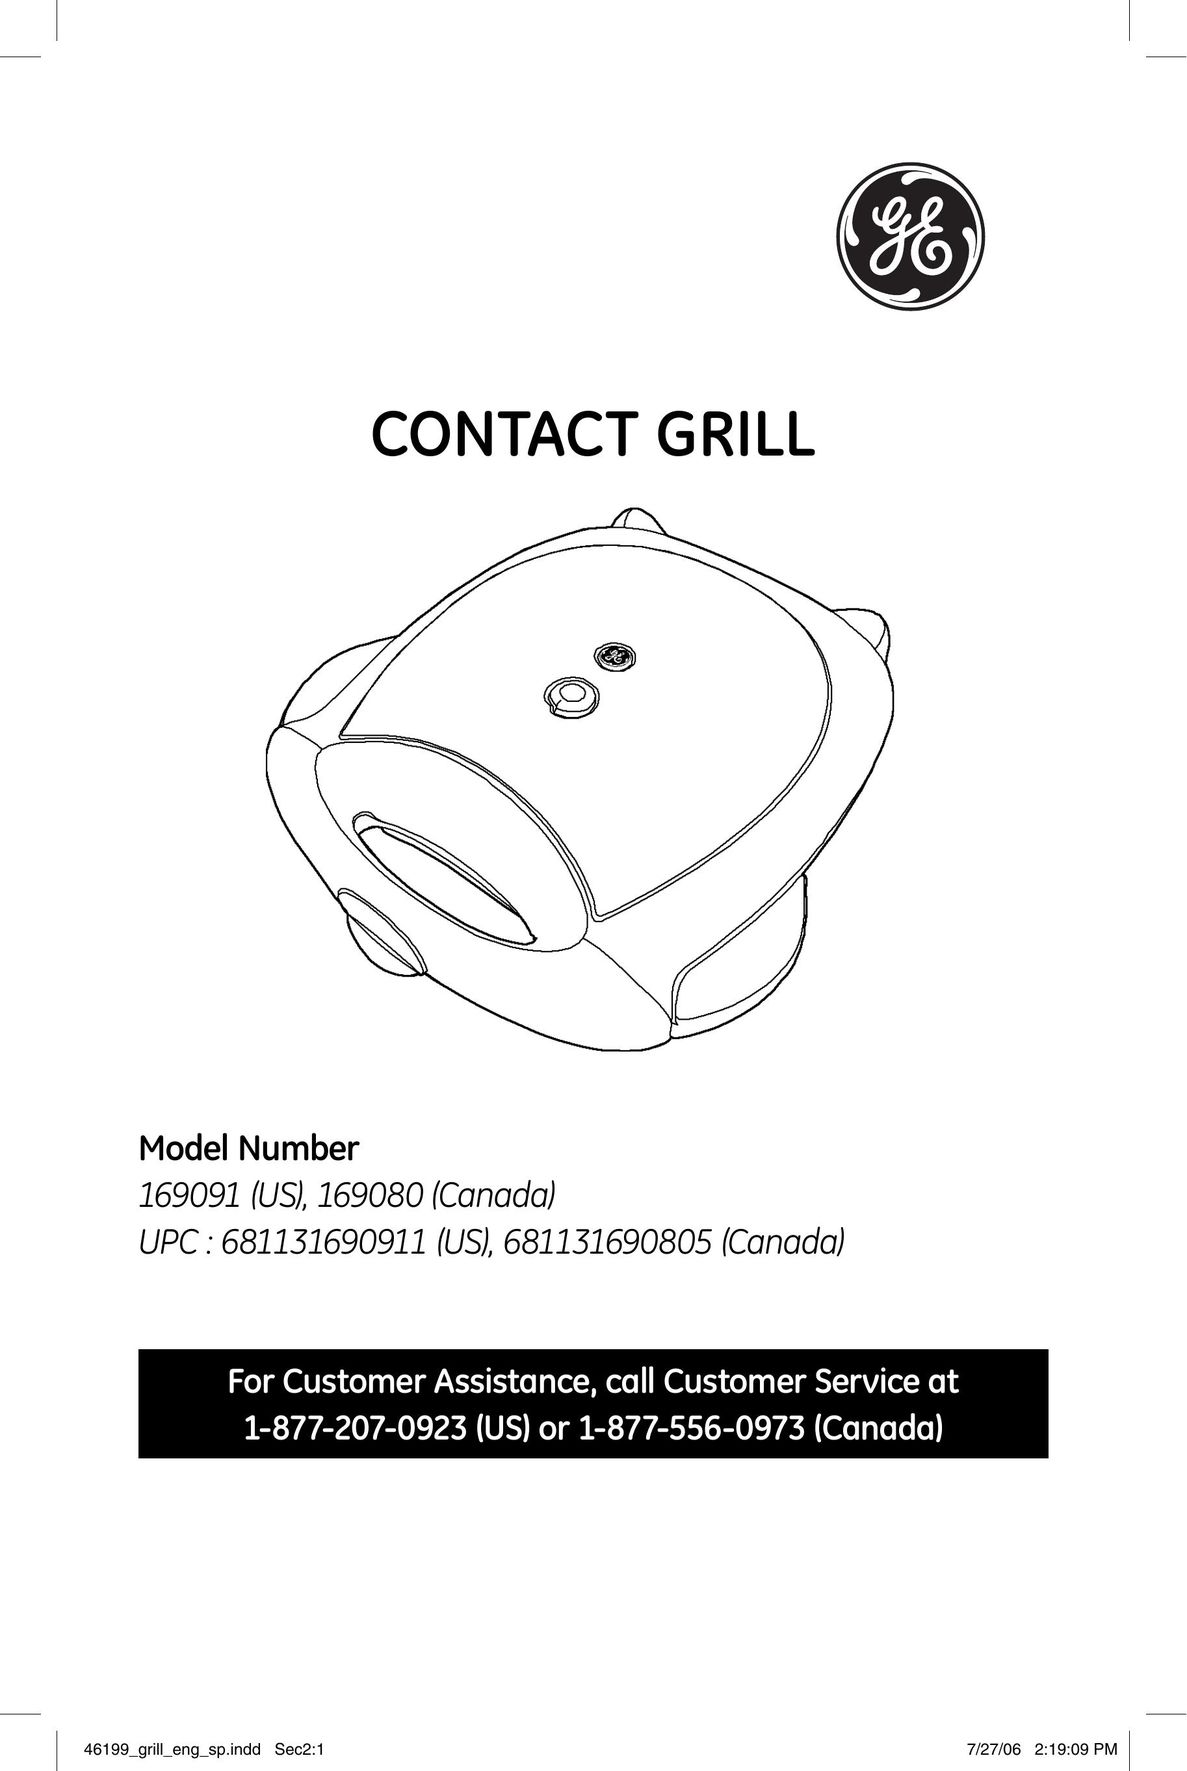 GE 681131690805 Kitchen Grill User Manual